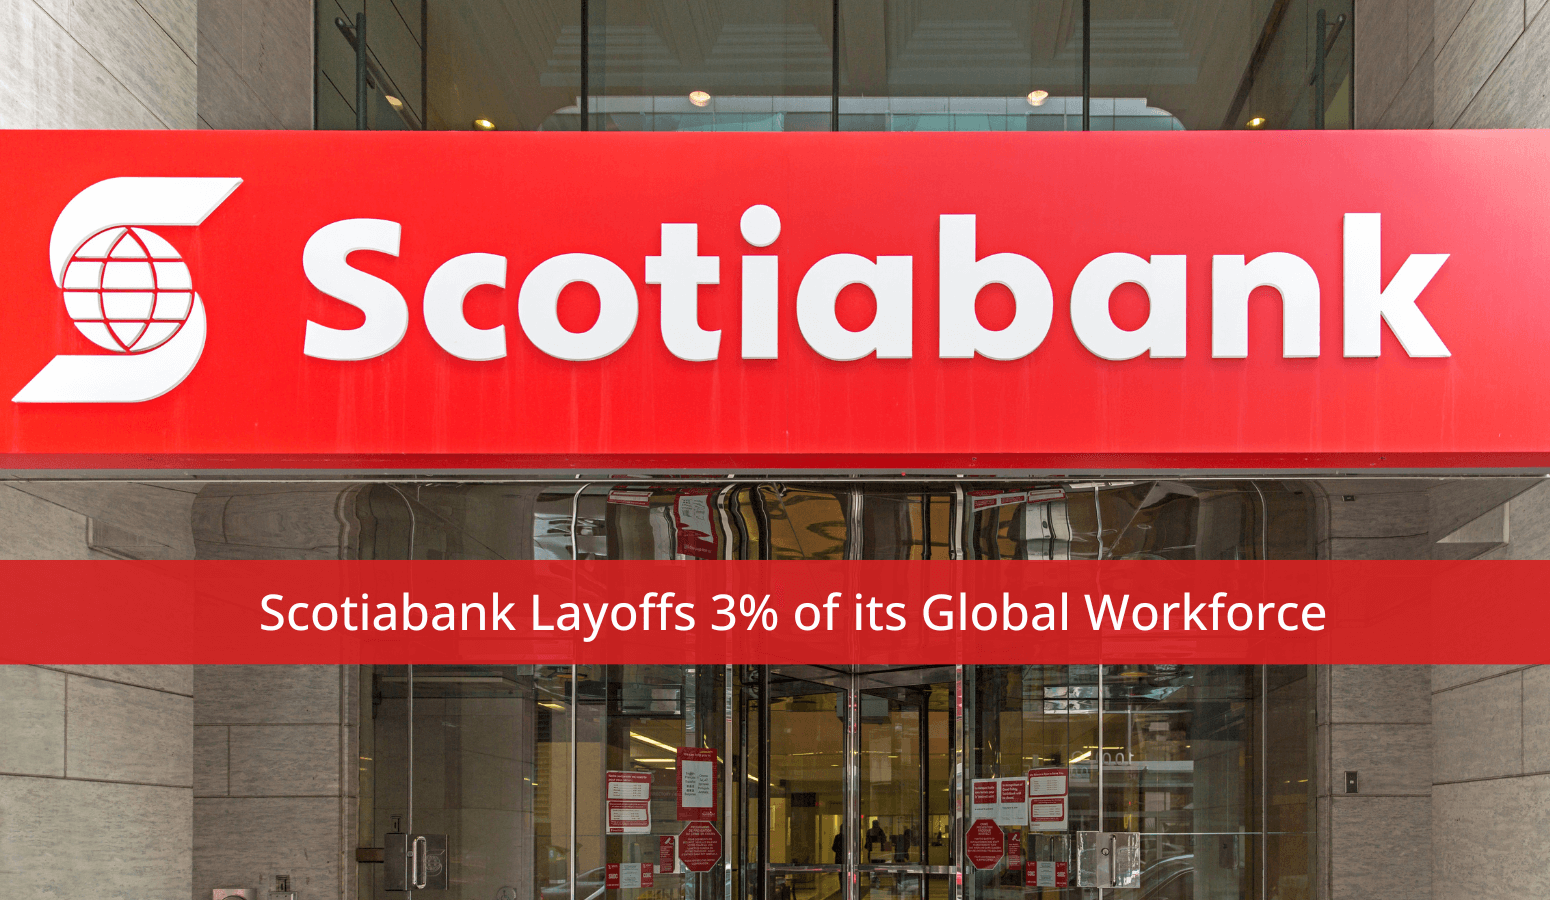 Featured image for “Scotiabank Layoffs 3% of its Global Workforce”